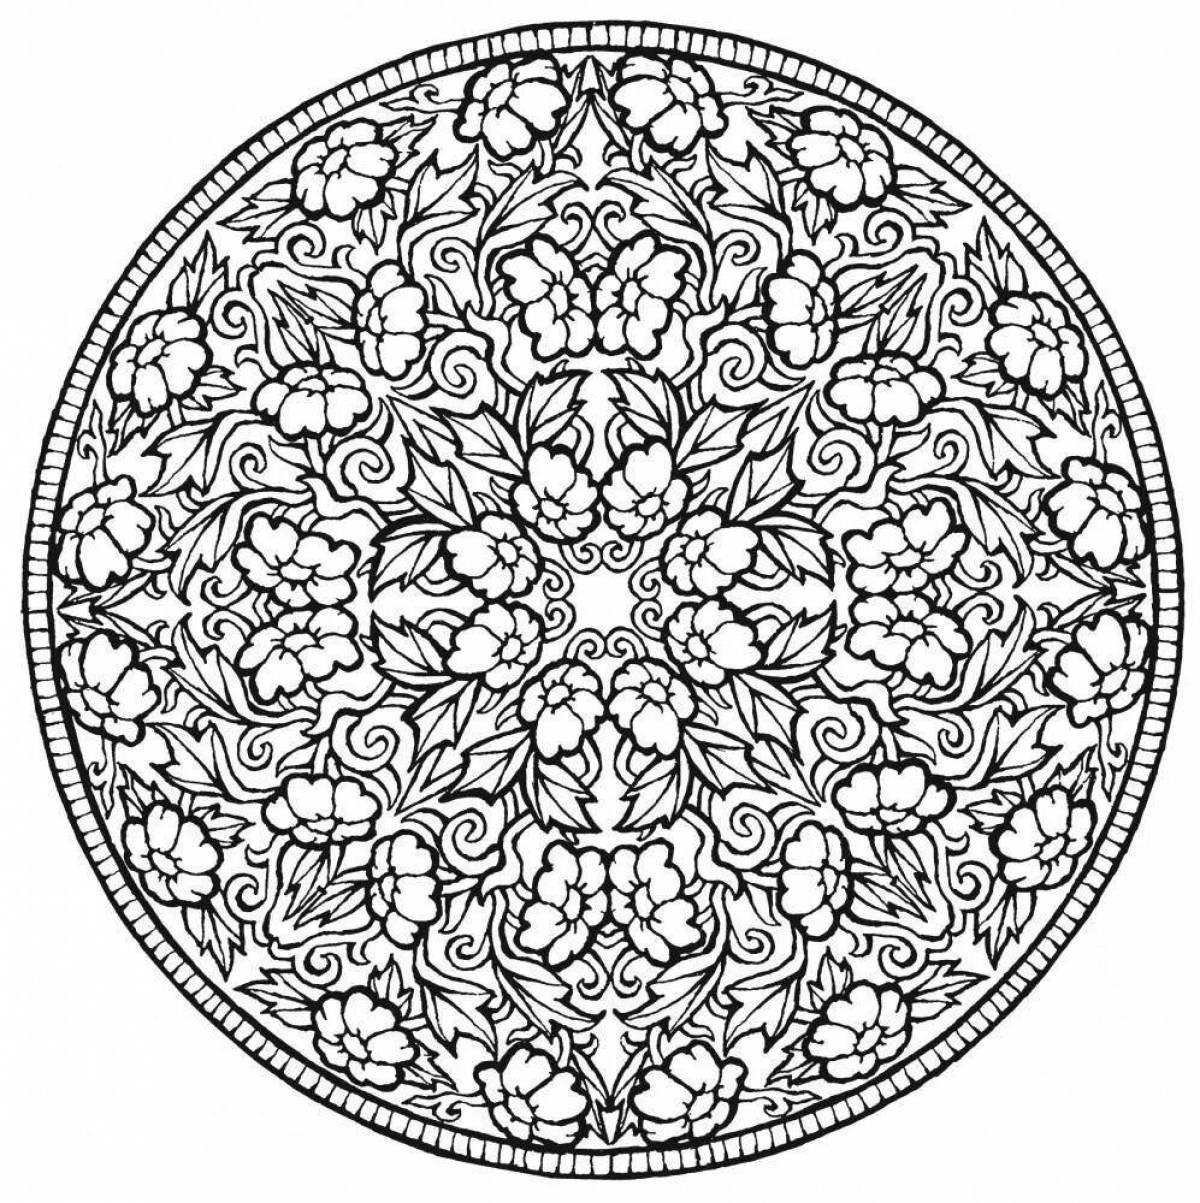 Coloring pages of the mantra